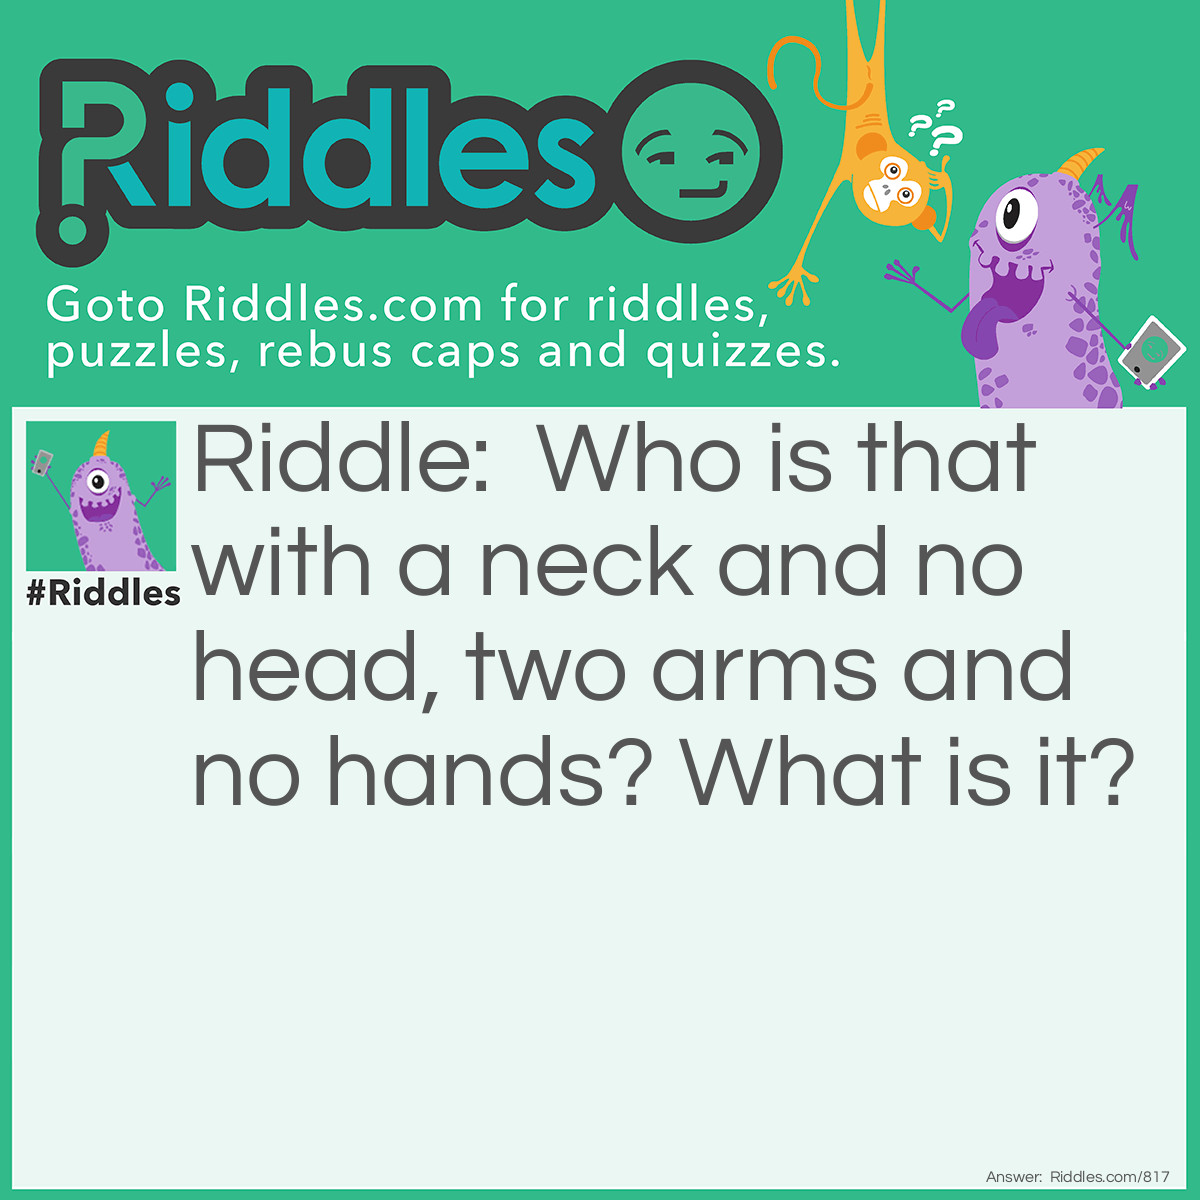 Riddle: Who is that with a neck and no head, two arms and no hands? What is it? Answer: A shirt.